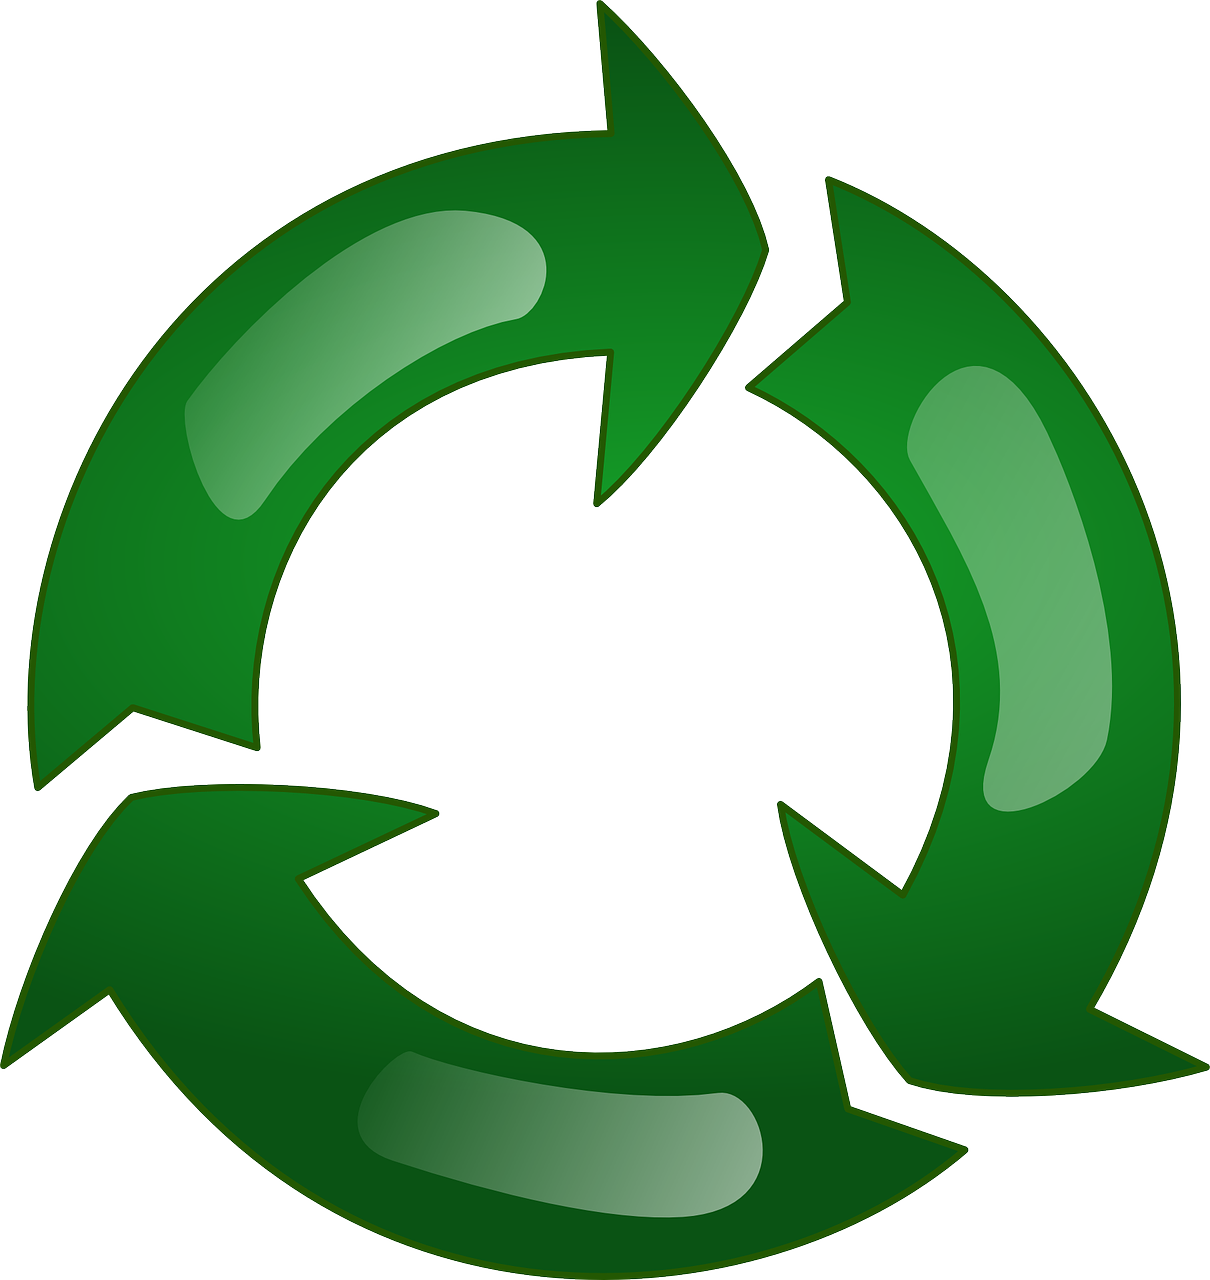 Recycle Arrows Cycle Rotation Png Image Recycling Gif